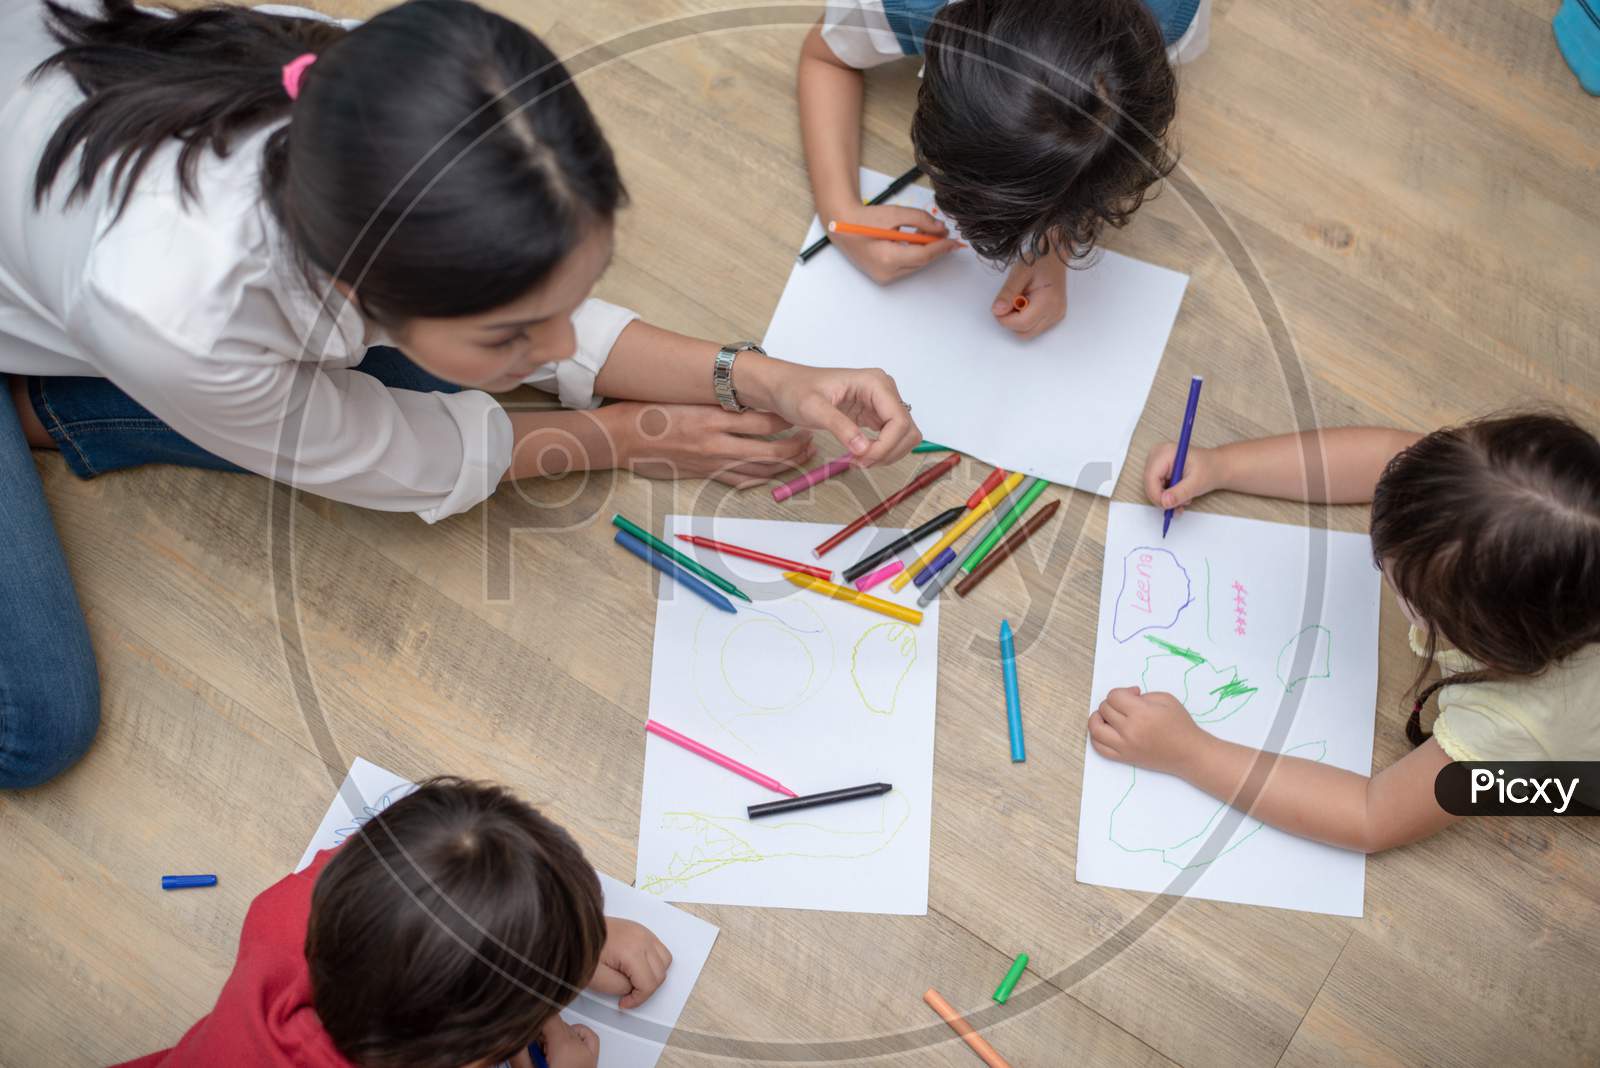 Group Of Preschool Student And Teacher Drawing On Paper In Art Class. Back To School And Education Concept. People And Lifestyles Theme.  Room In Nursery